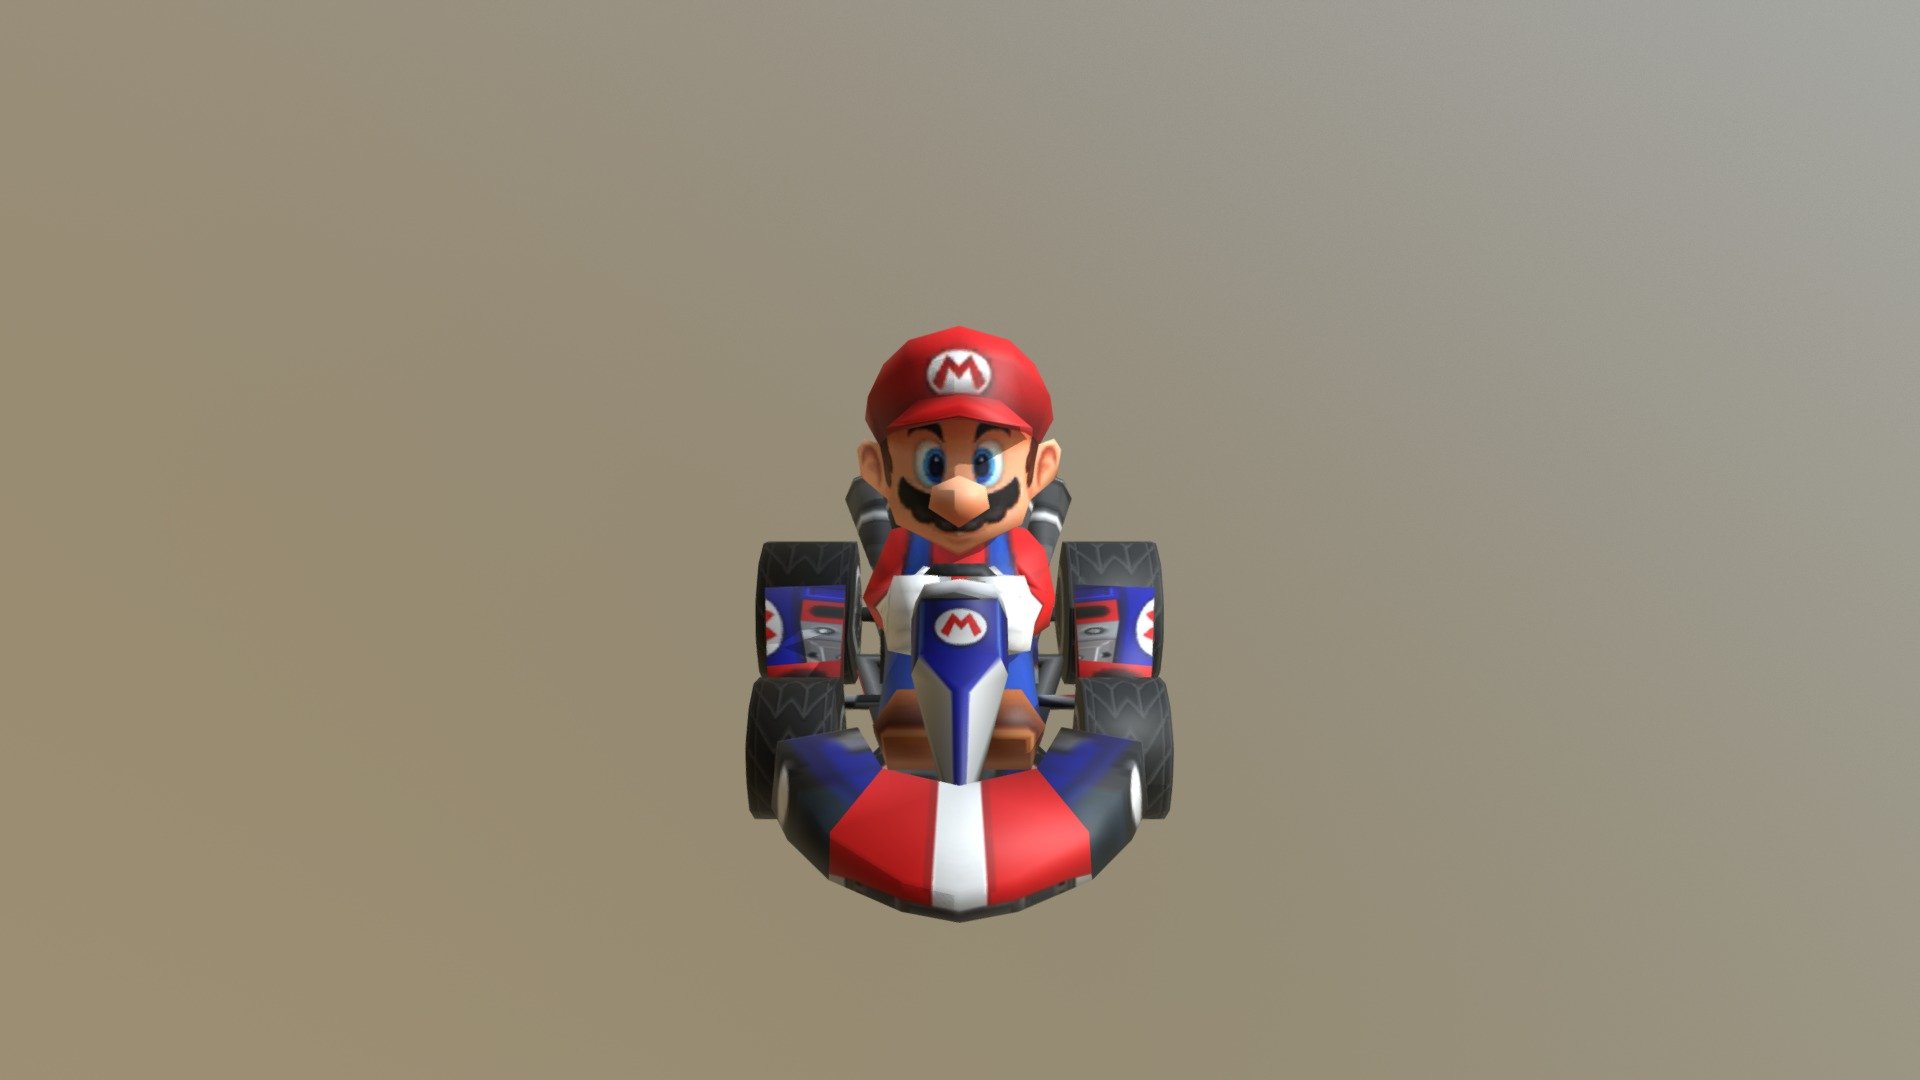 Mario Kart Download Free 3d Model By Theshibelord Theshibelord 66cc131